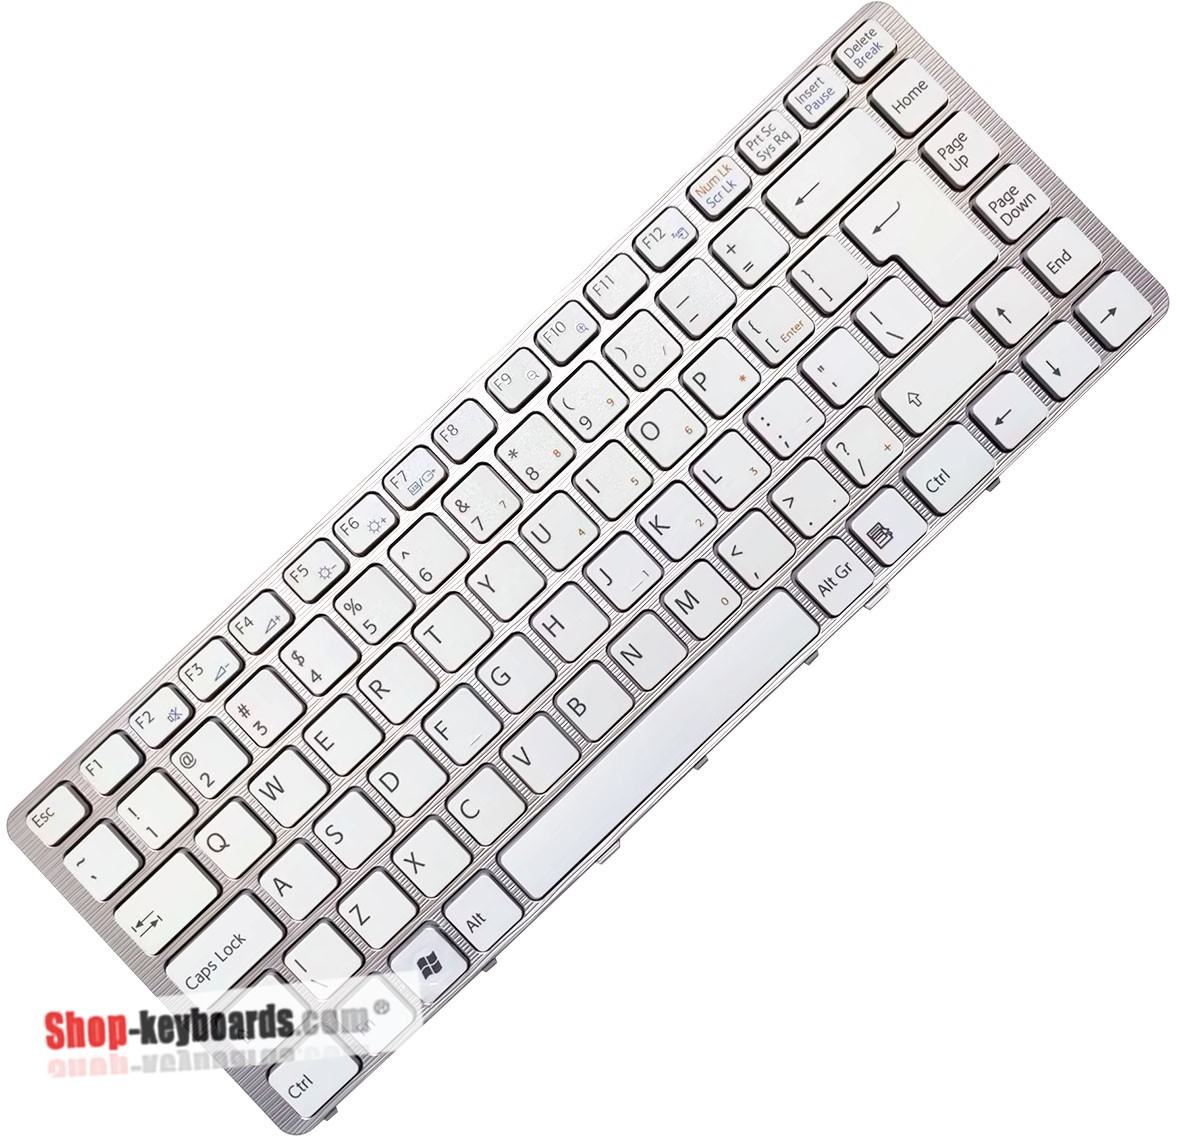 Sony VAIO VGN-NW160J/S  Keyboard replacement